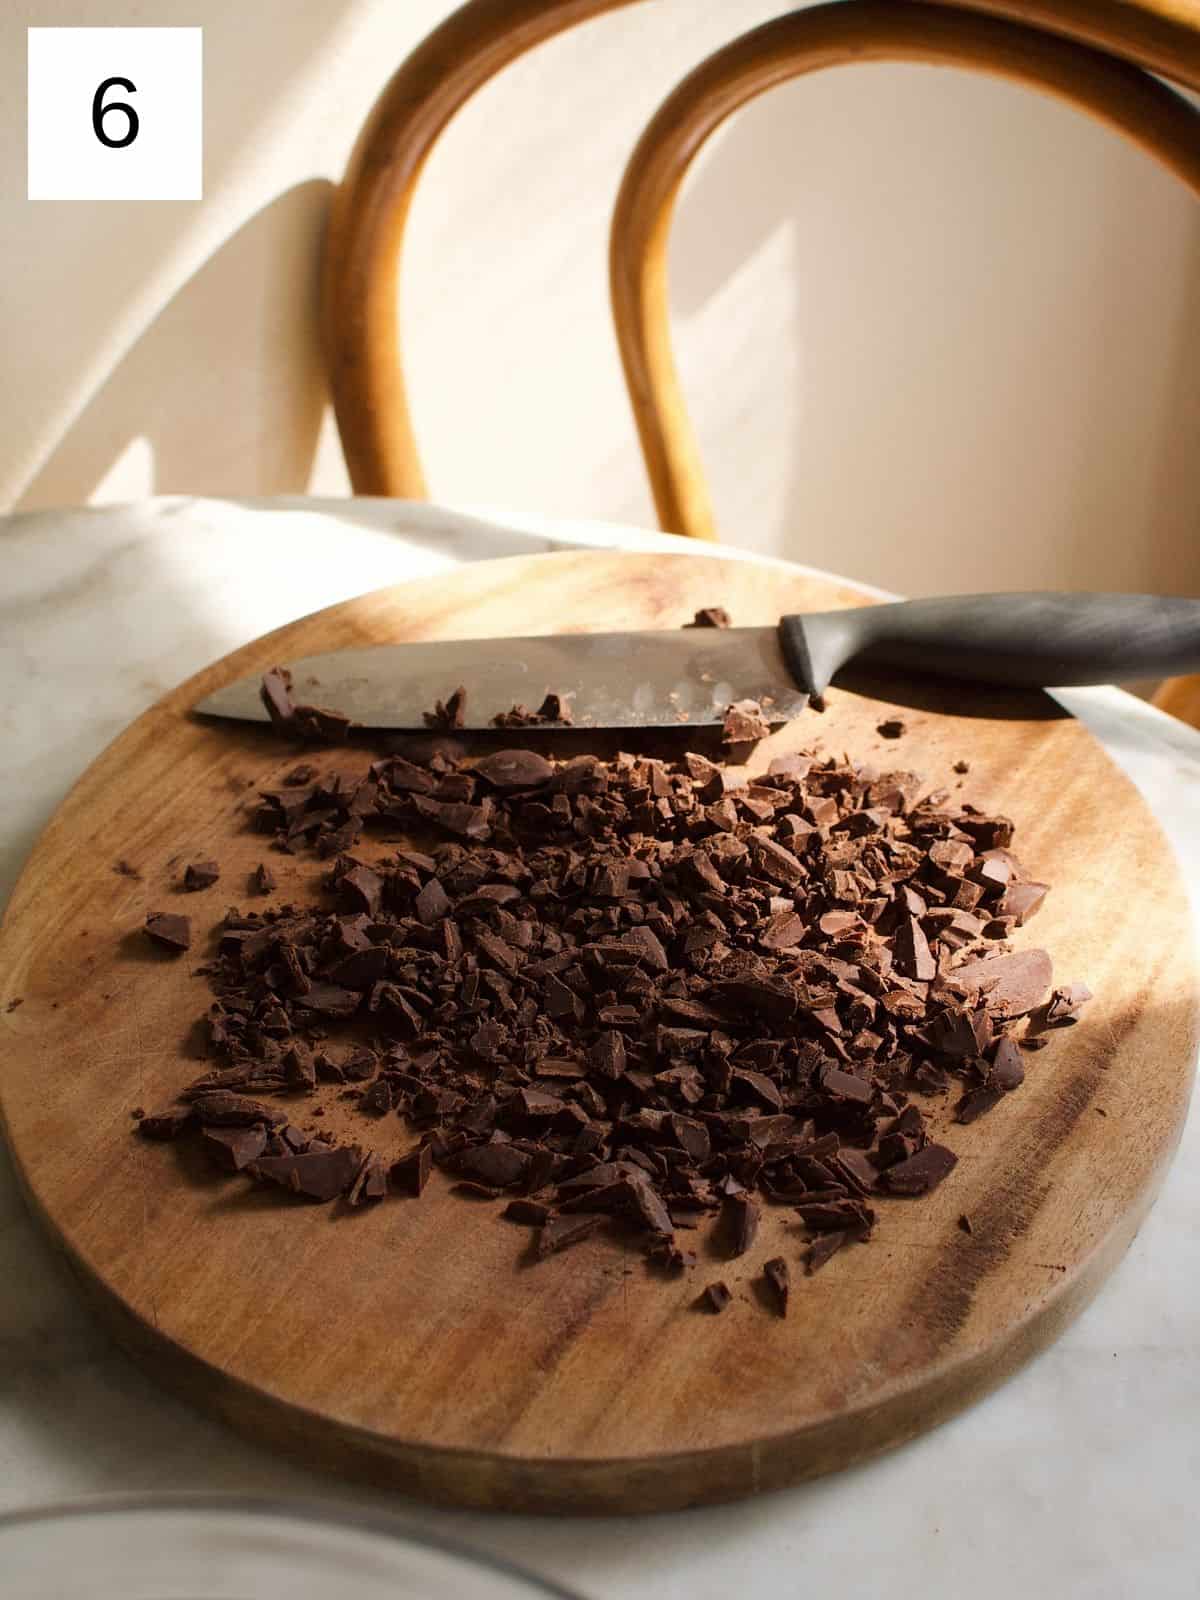 Chocolate chopped into pieces.